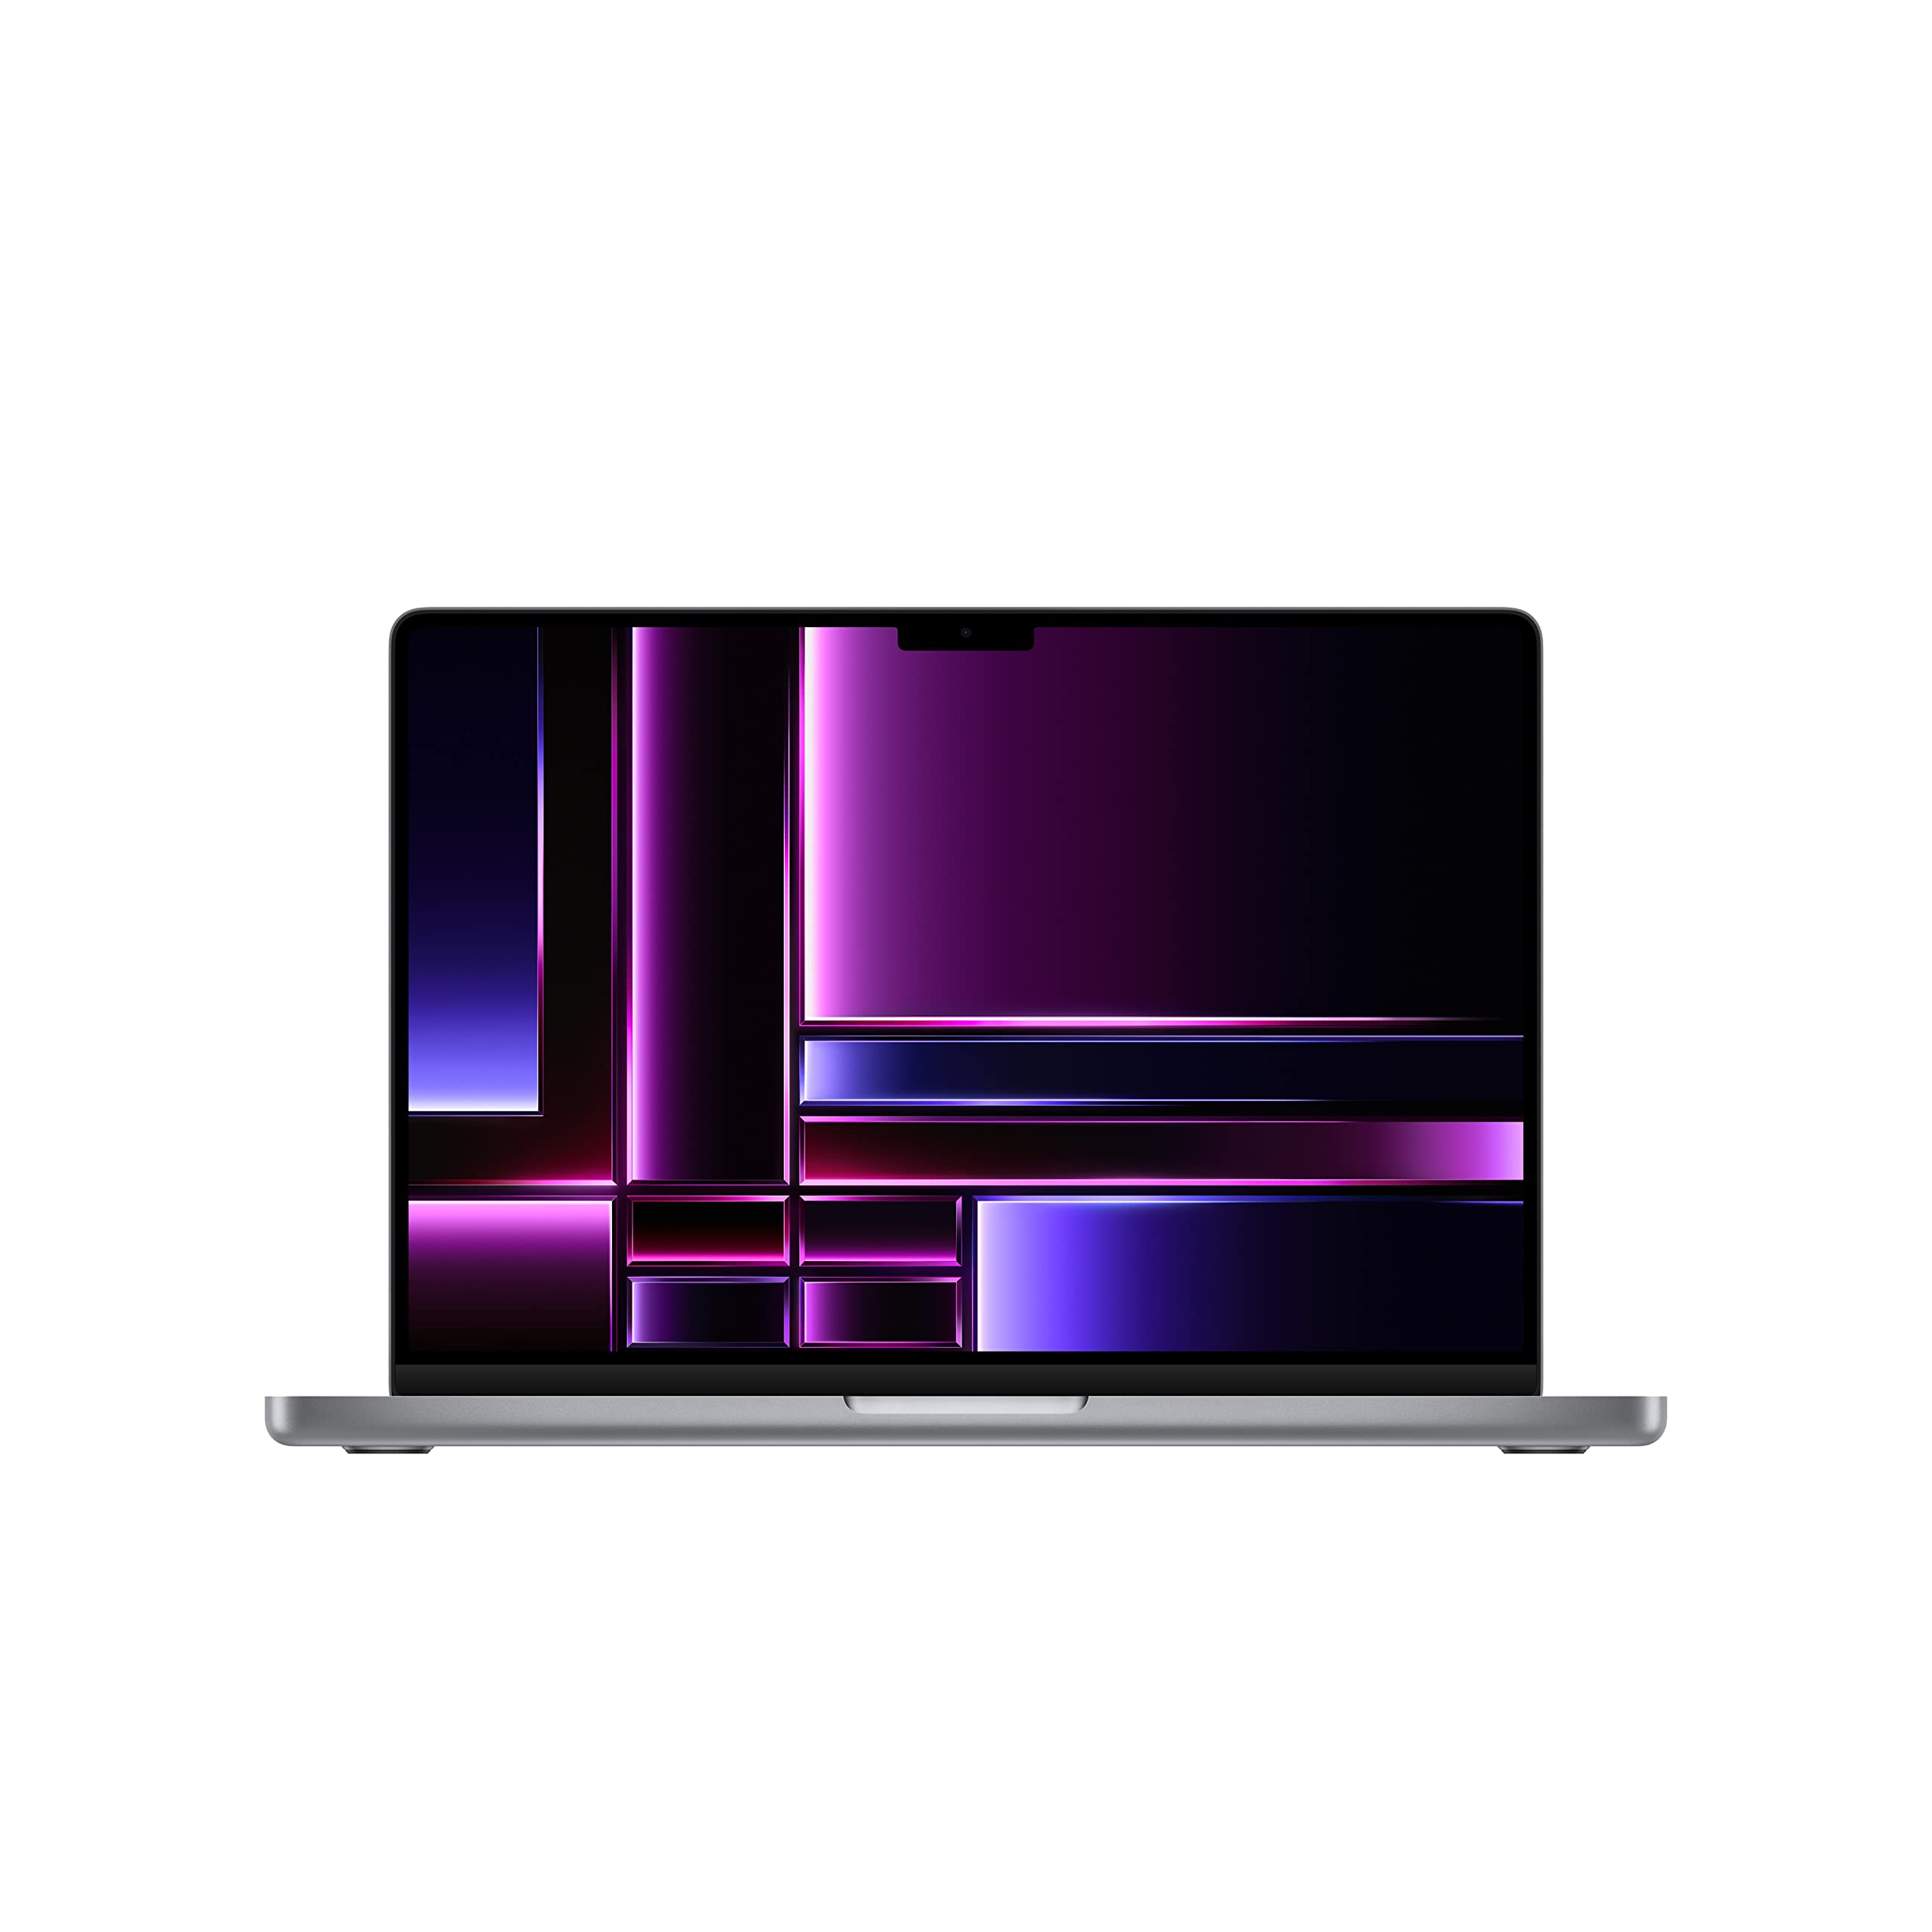 Apple 2023 MacBook Pro Laptop M2 Pro chip with 12‑core CPU and 19‑core GPU: 14.2-inch Liquid Retina XDR Display, 16GB Unified Memory, 1TB SSD Storage. Amazon $2,199 Prime Shipping